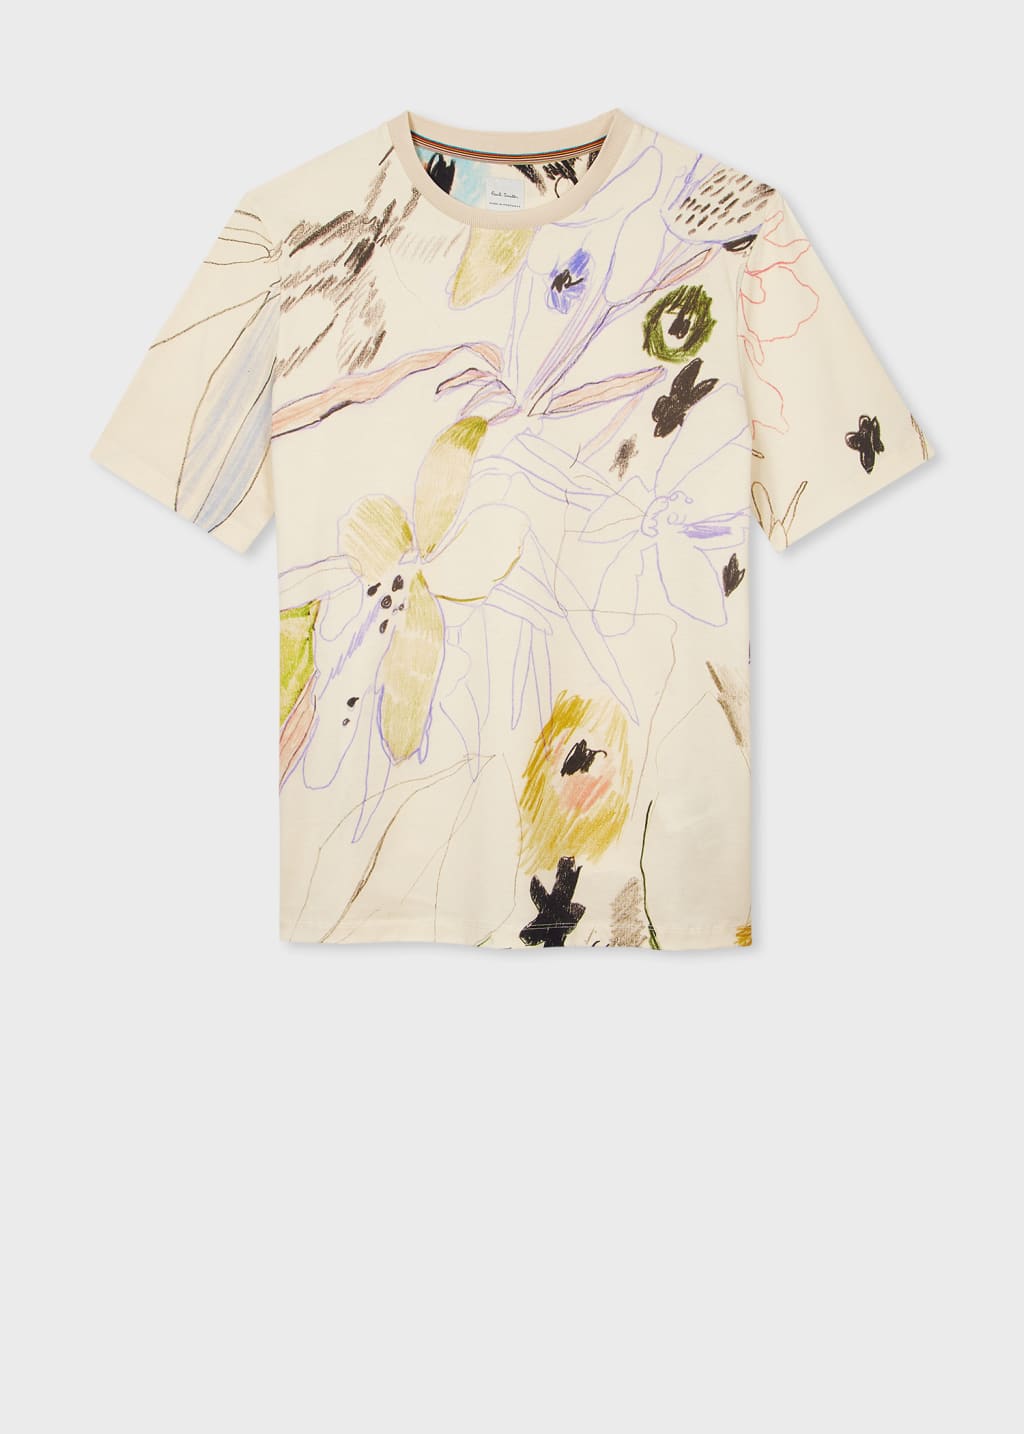 Product view - 'Sketchbook Botanical' Print T-Shirt Paul Smith